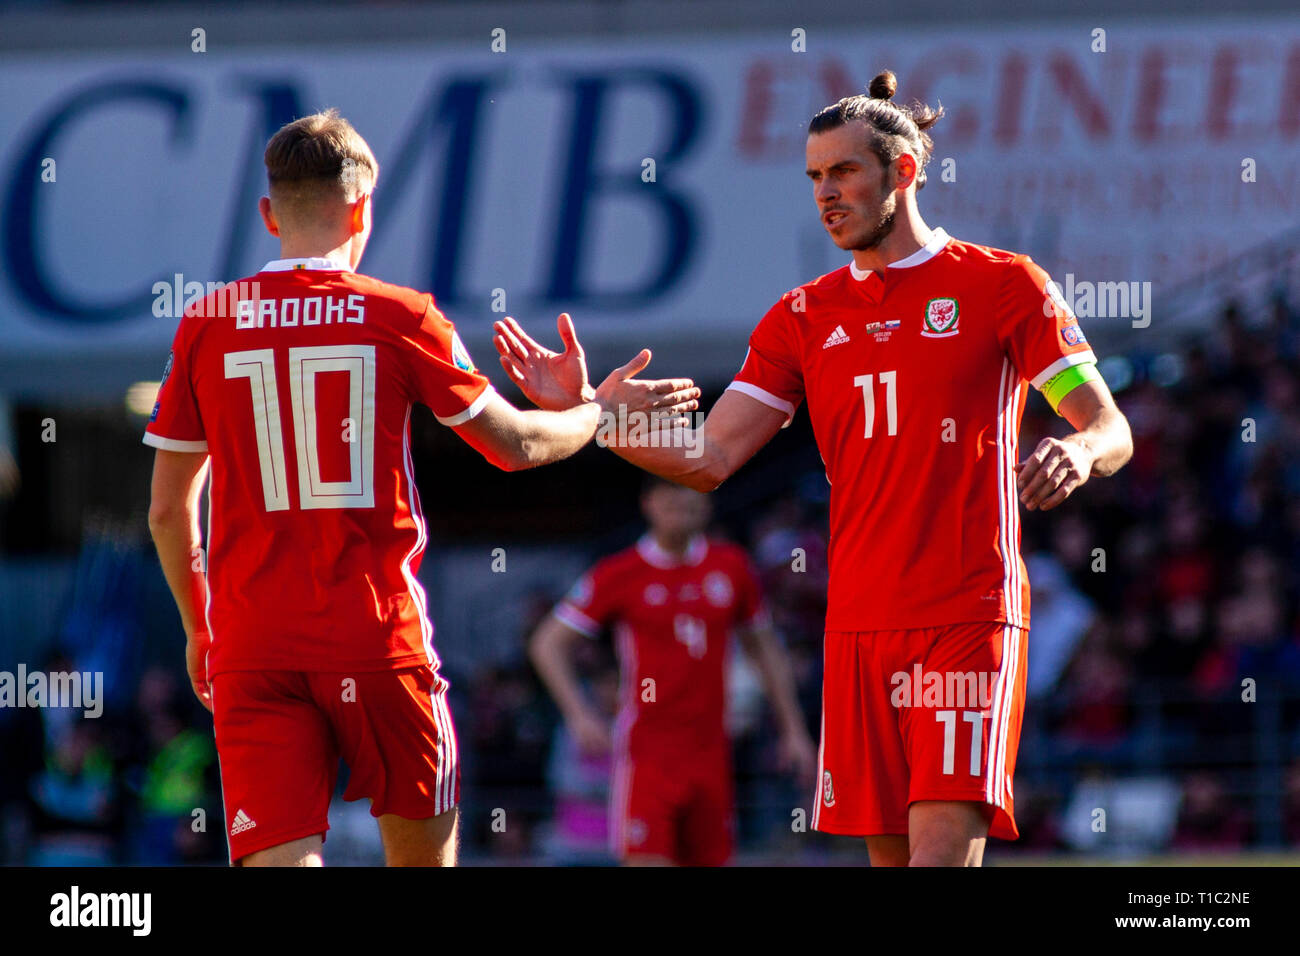 David Brooks of Wales is substituted against Slovakia. Wales v Slovakia UEFA Euro 2020 Qualifier at the Cardiff City Stadium, Stock Photo